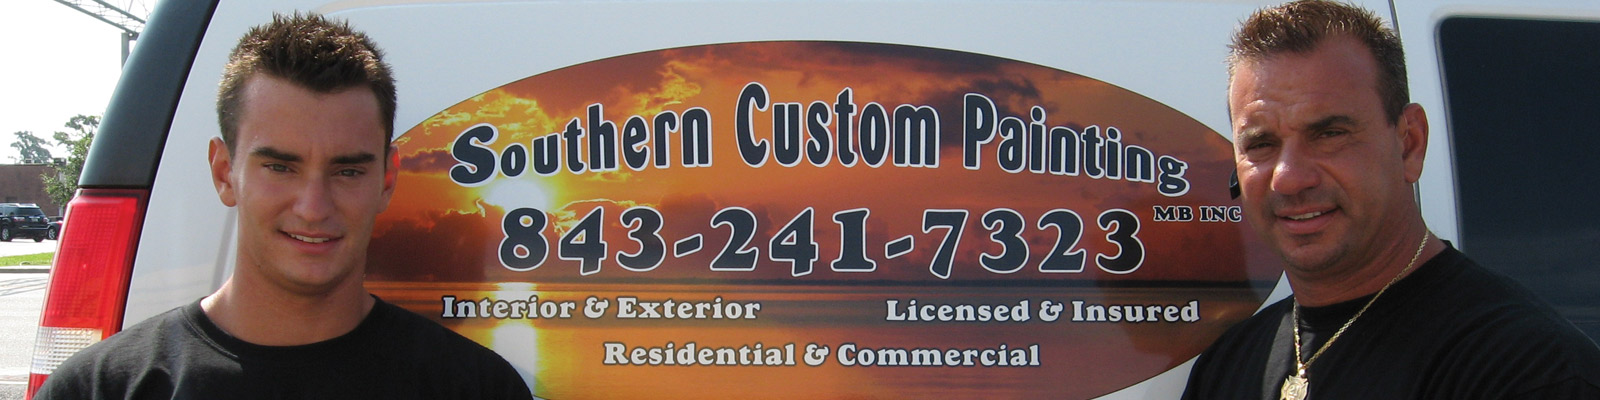 Myrtle Beach Painting Company